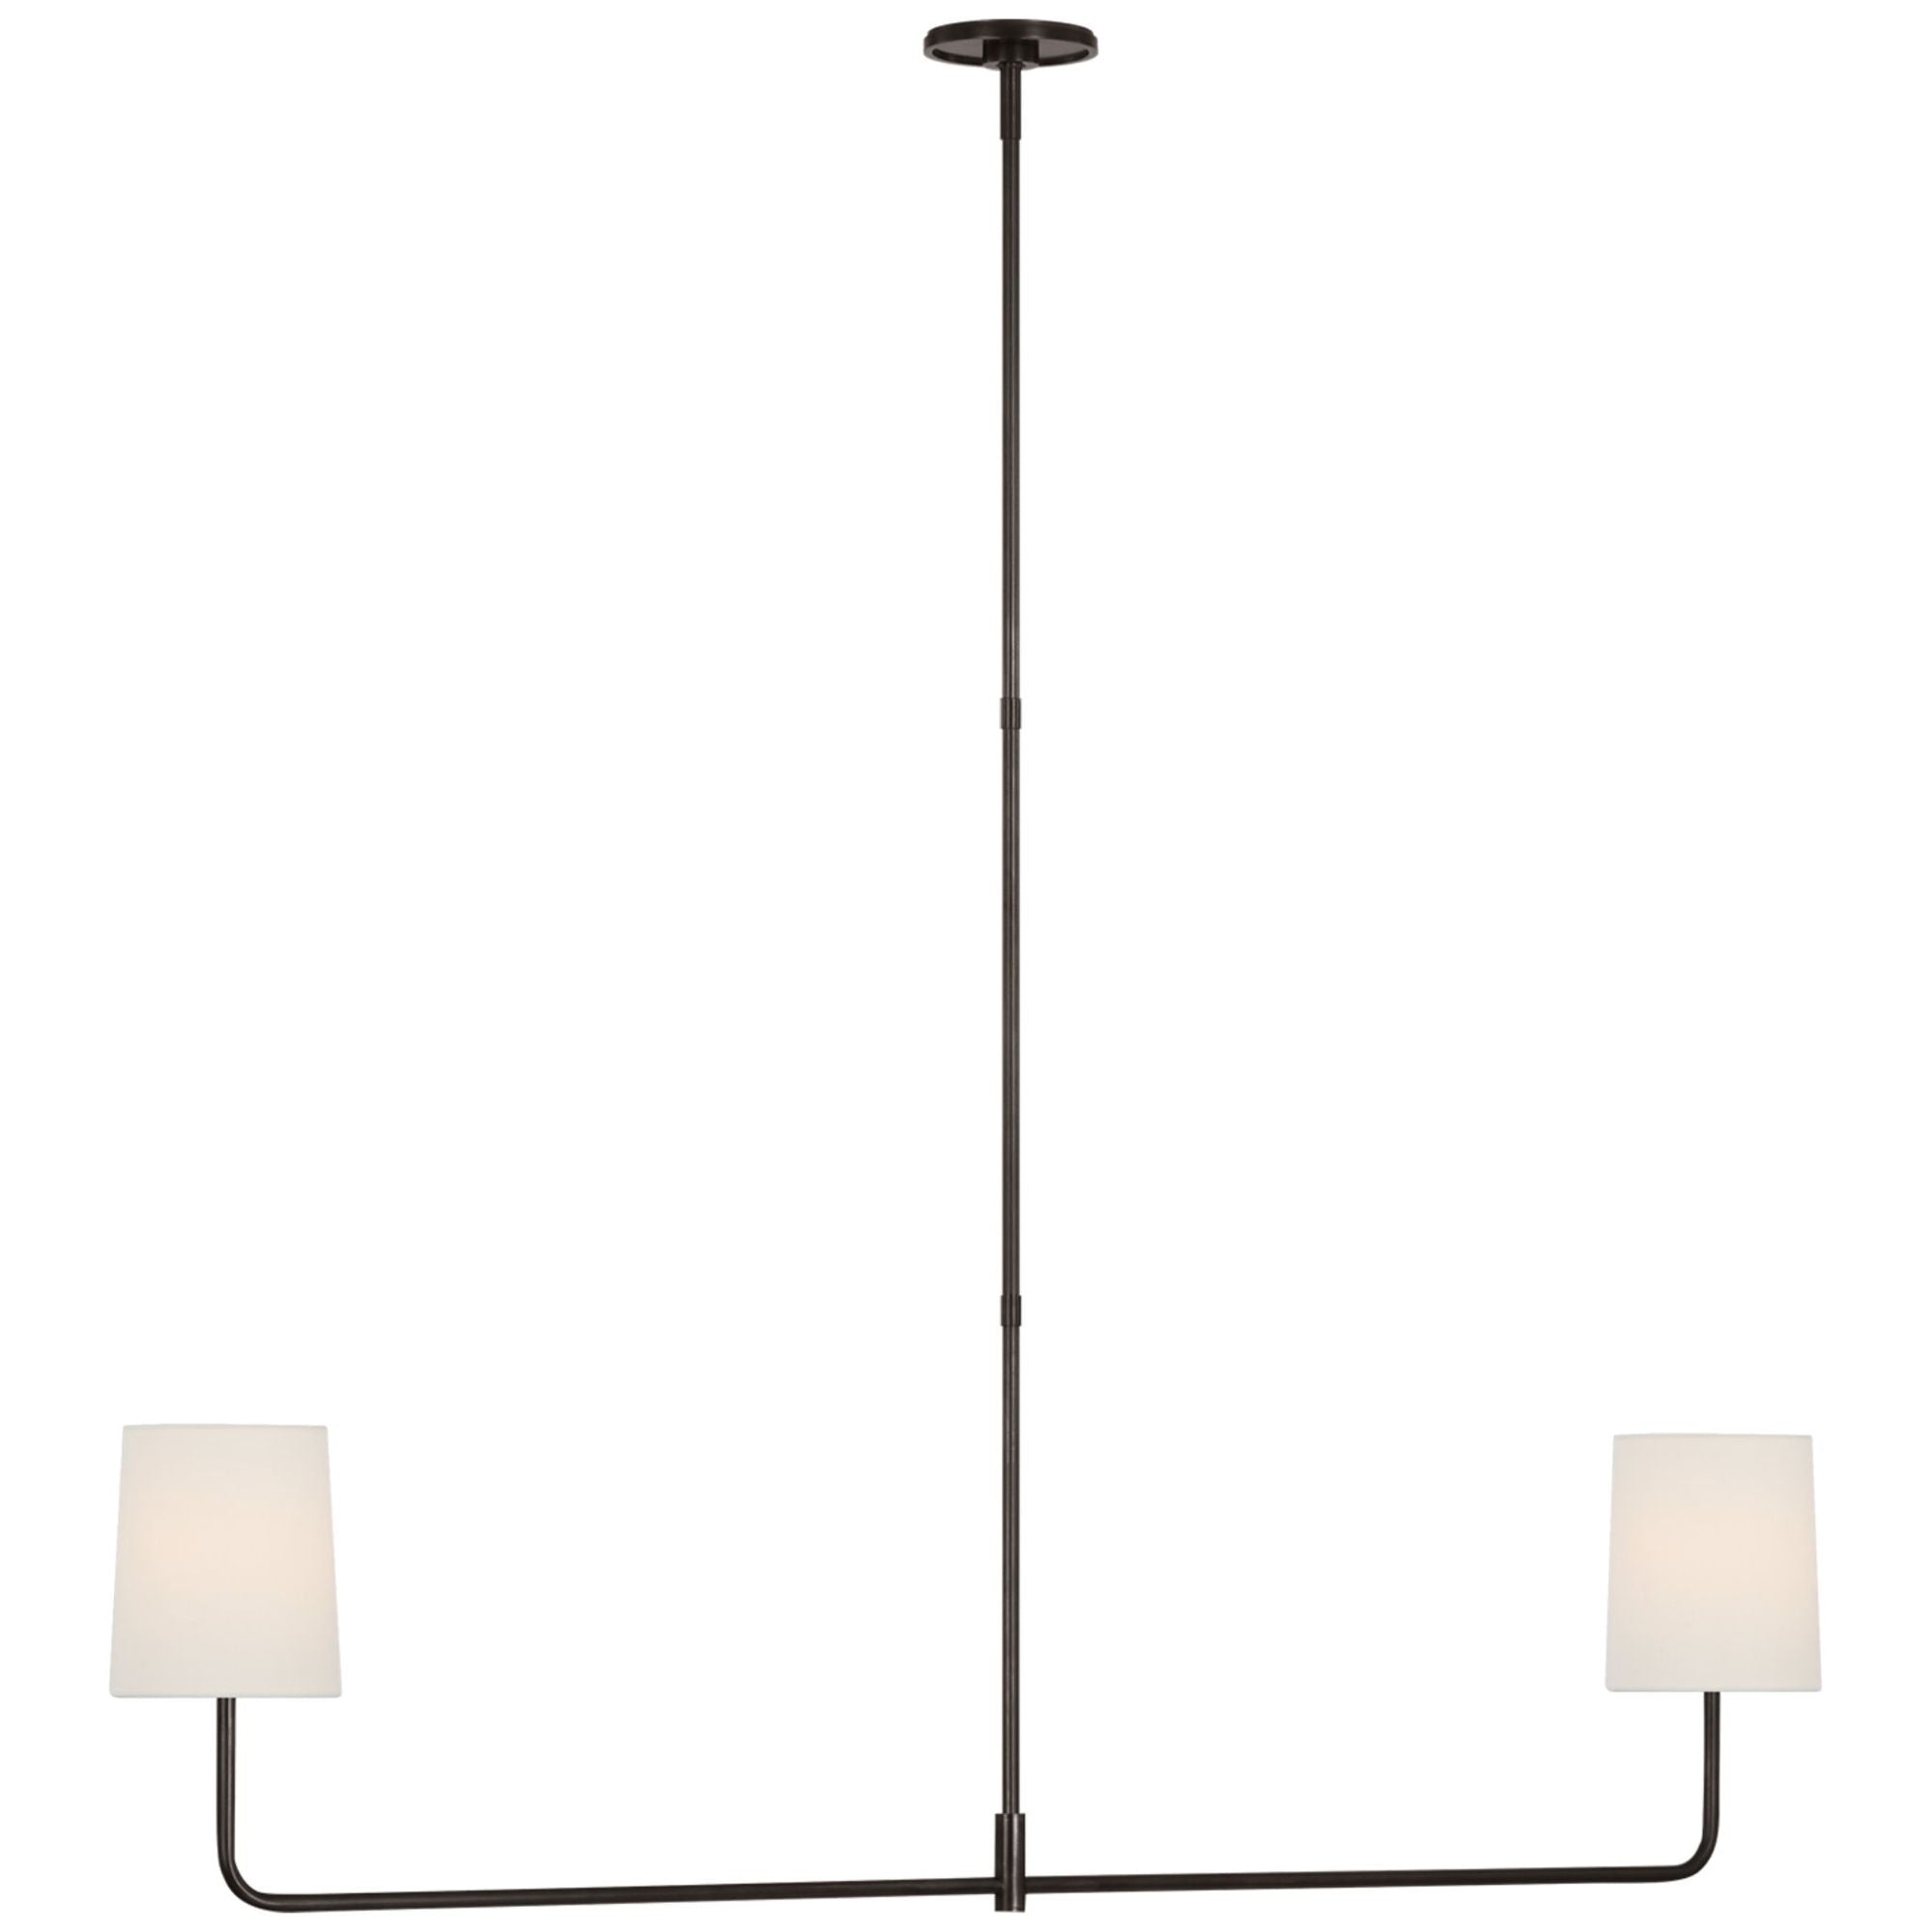 Barbara Barry Go Lightly 54" Two Light Linear Chandelier in Bronze with Linen Shades